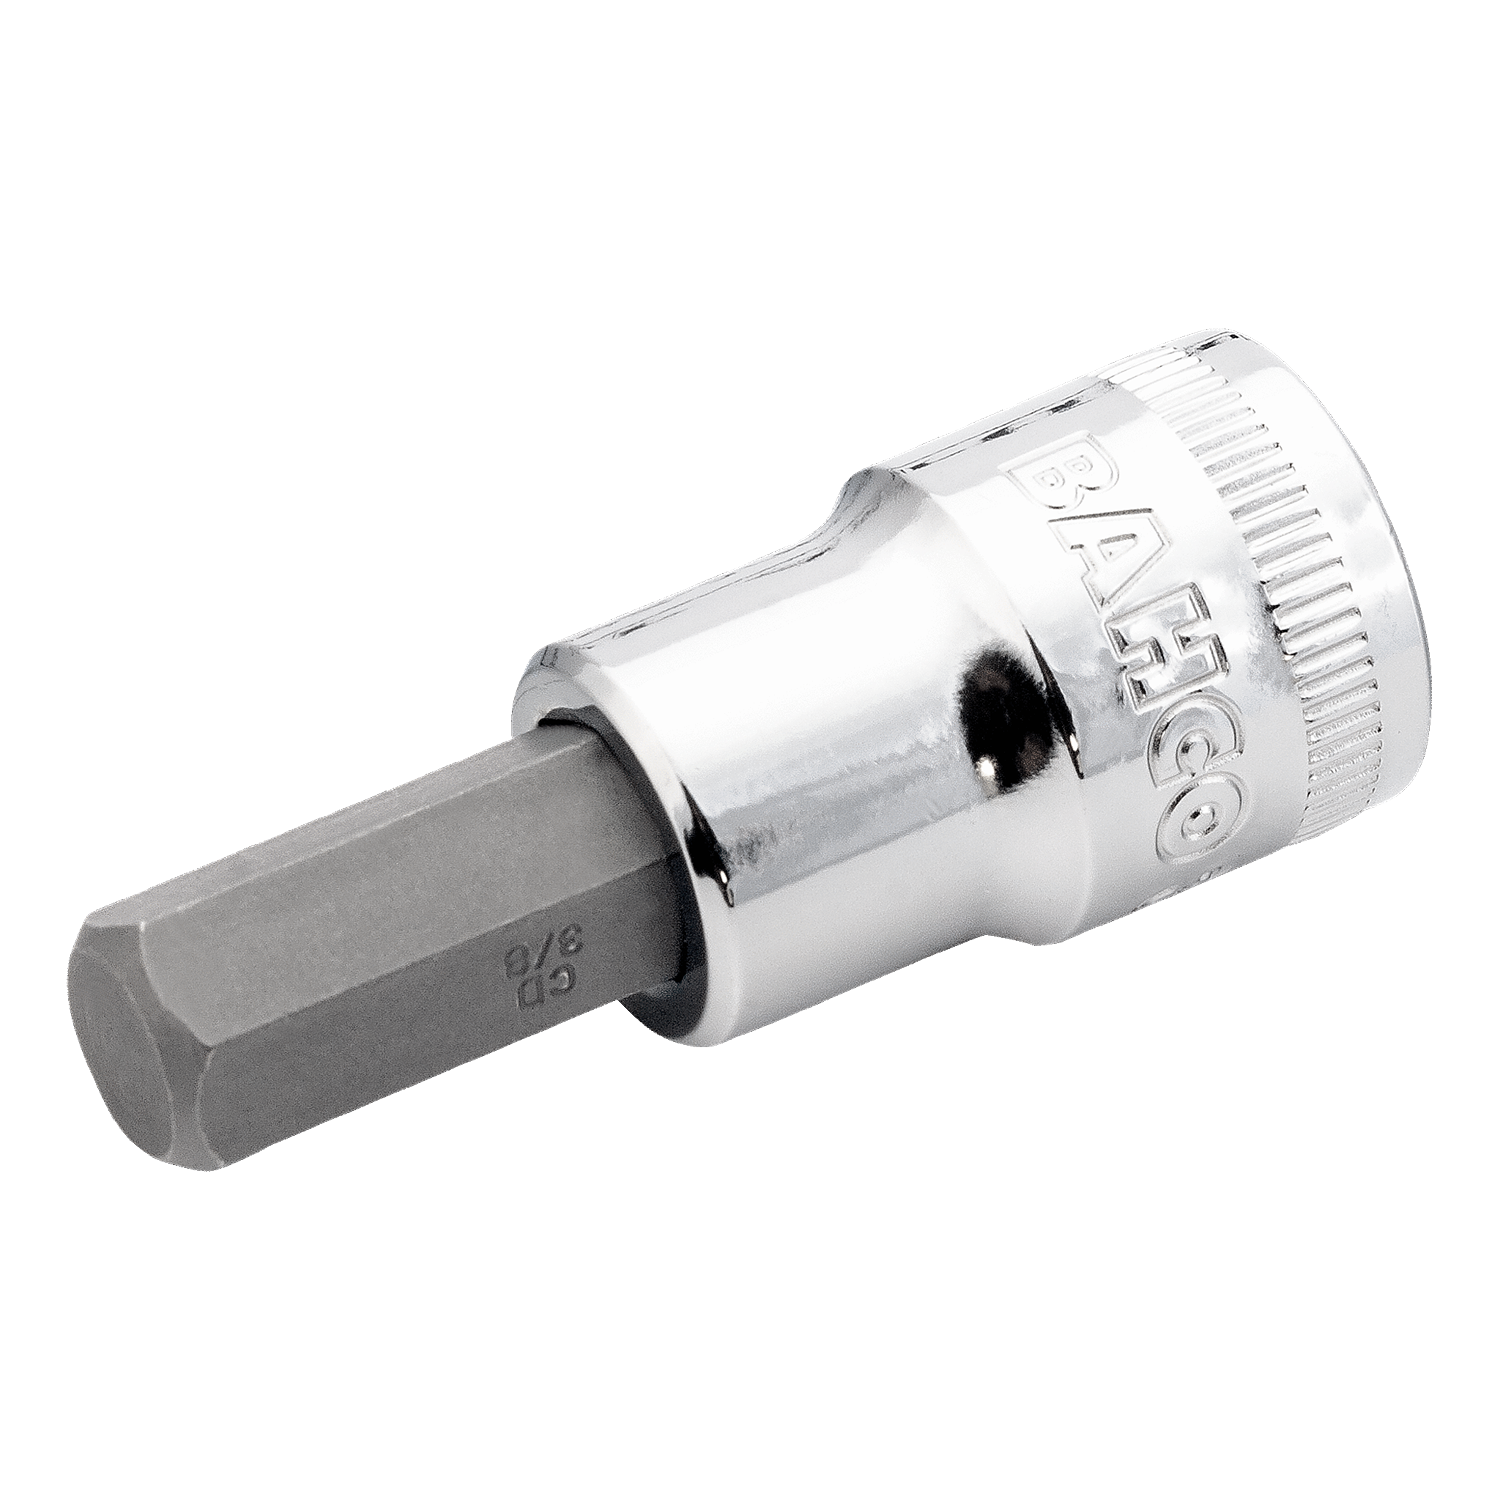 BAHCO 7409Z 3/8" Screwdriver Socket Square Hex Head (BAHCO Tools) - Premium Screwdriver Socket from BAHCO - Shop now at Yew Aik.